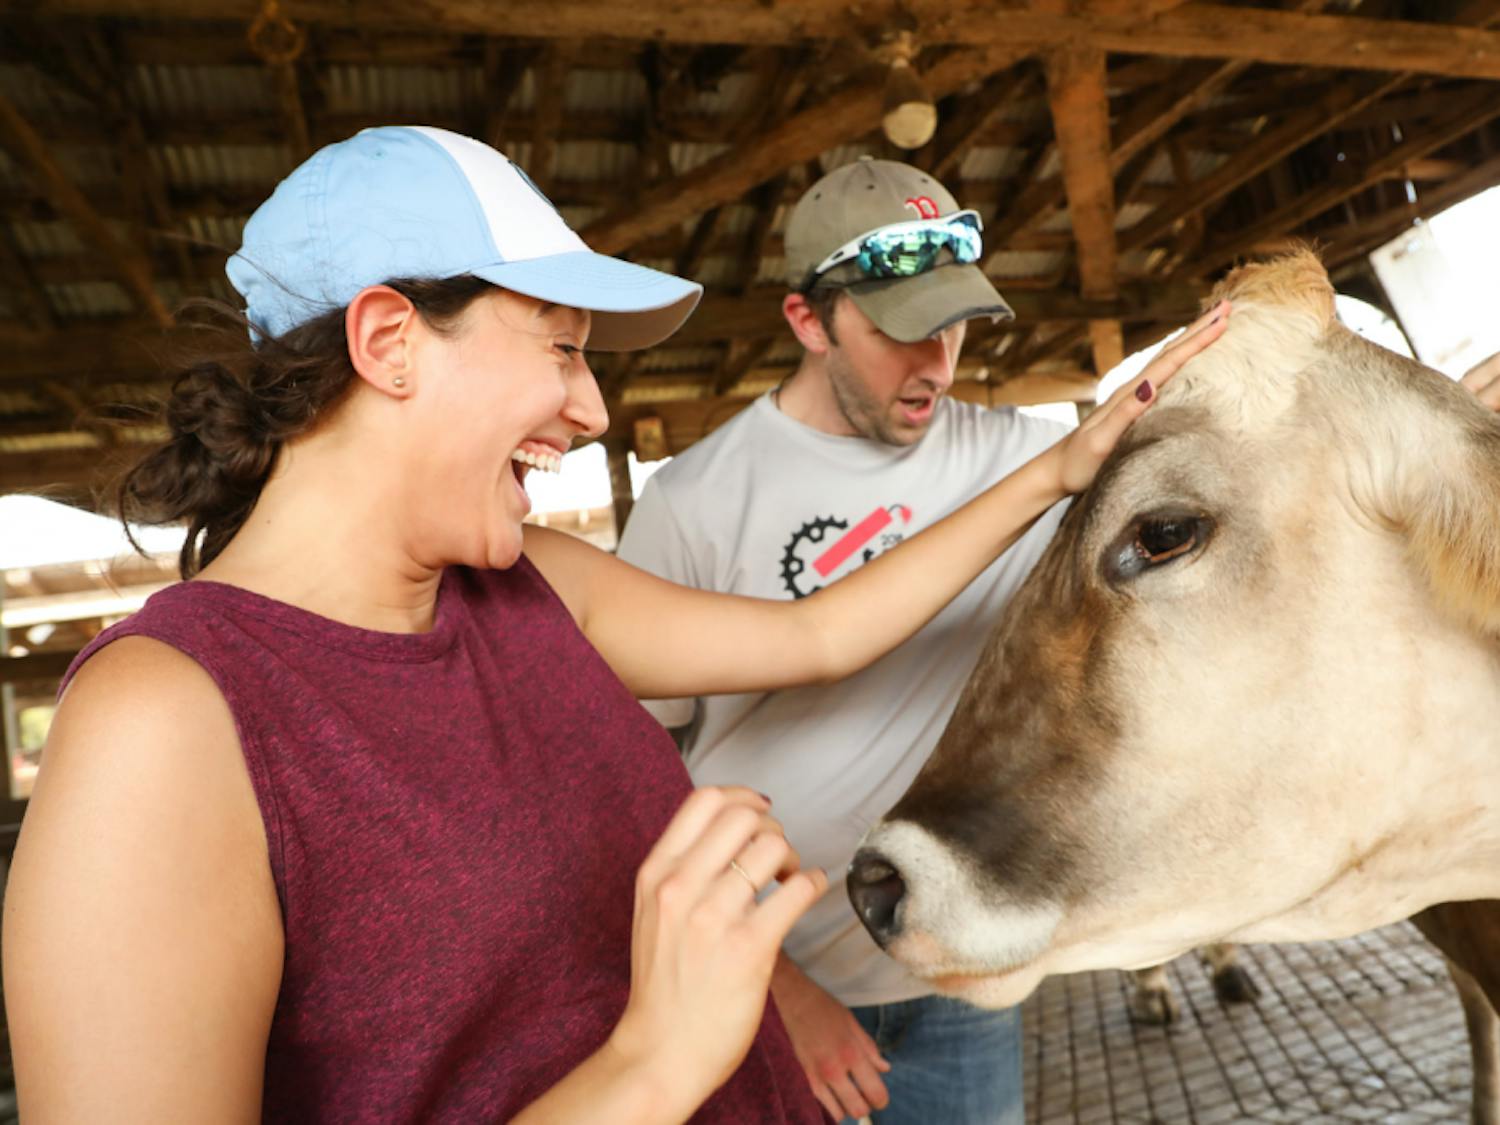 "Dairyland" cast members Emily Bosco and Dan Toot at Brush Creek Swiss Farm in Siler City, NC. Photo courtesy of HuthPhoto. 